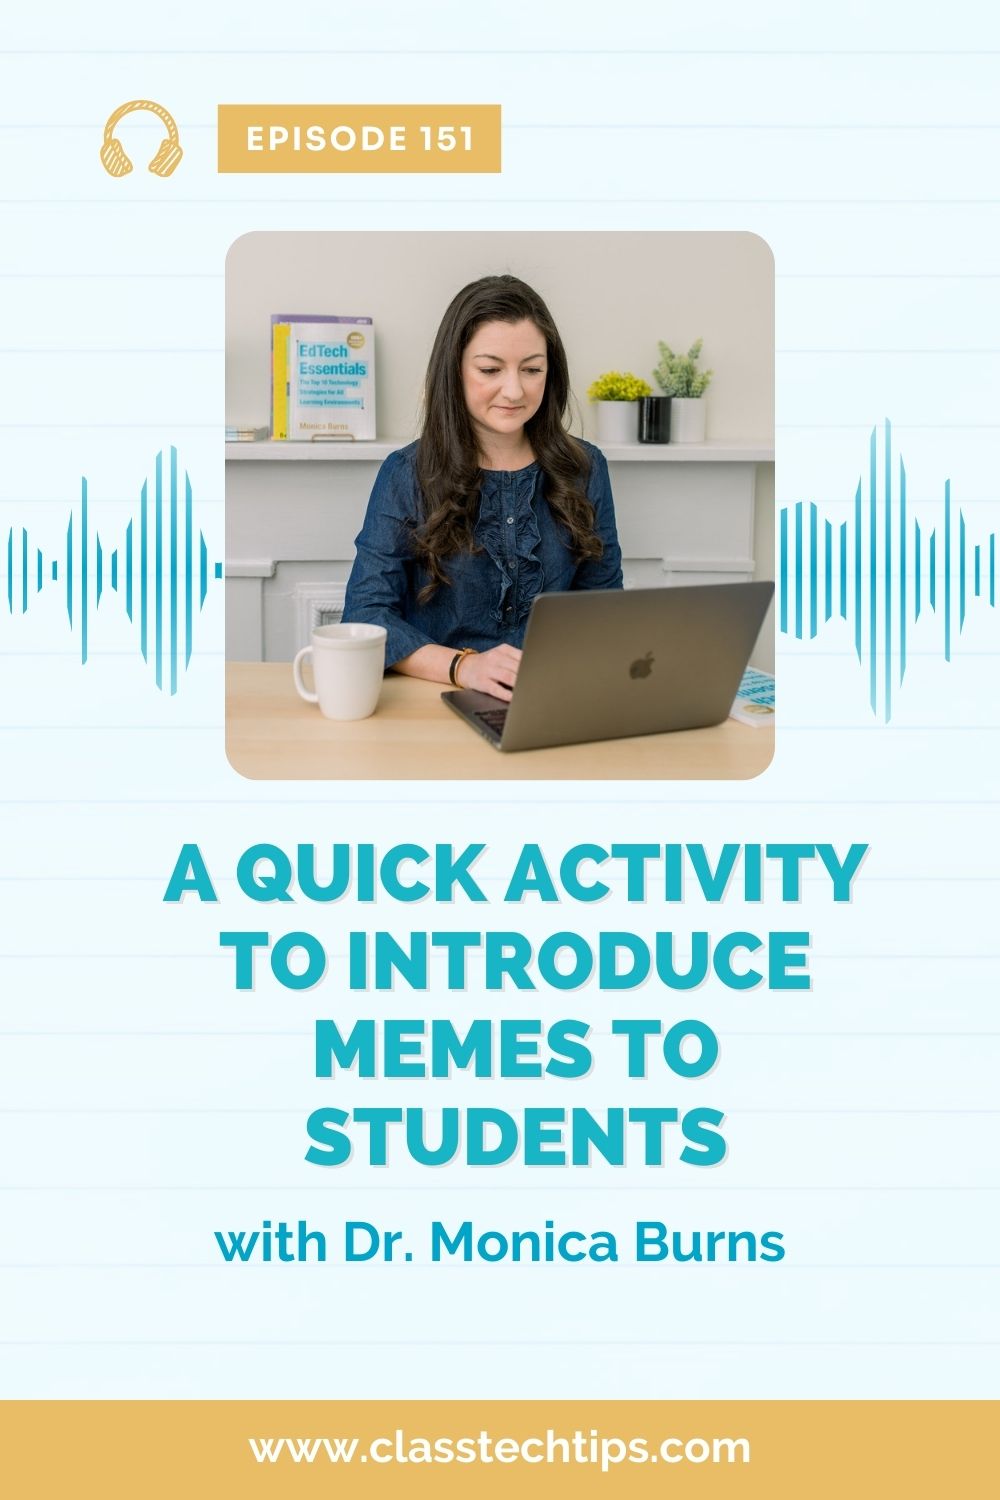 In this episode I share a favorite, quick meme activity to promote critical thinking and creativity in any subject area with EdTech tools.